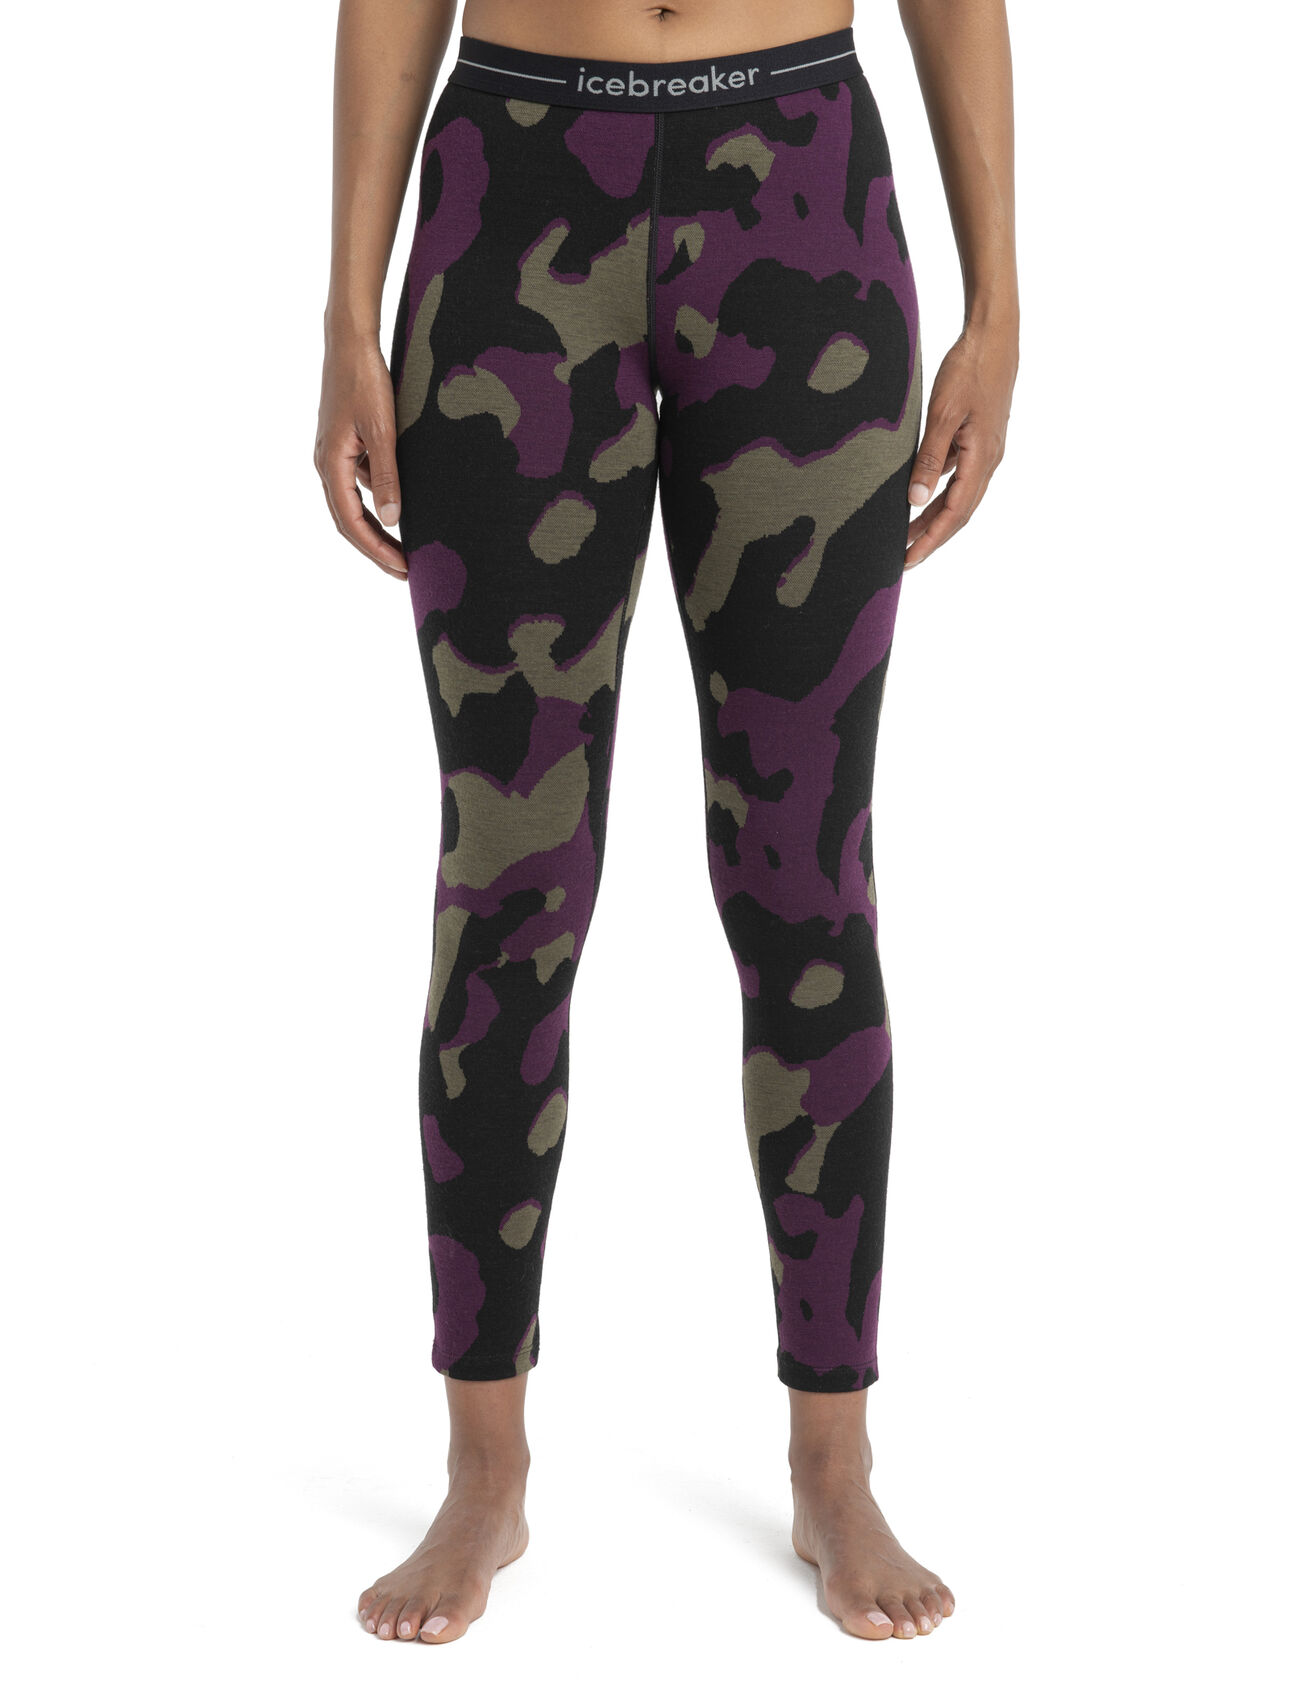 Womens Merino 260 Vertex Thermal Leggings Natural Shades Incredibly warm merino base layer bottoms with a unique jacquard pattern, the 260 Vertex Leggings Natural Shades are a go-to piece for winter layering—ideal for skiing, snowshoeing and other cold-weather pursuits. The original all-over print is inspired by the natural camo of the London Planetree.